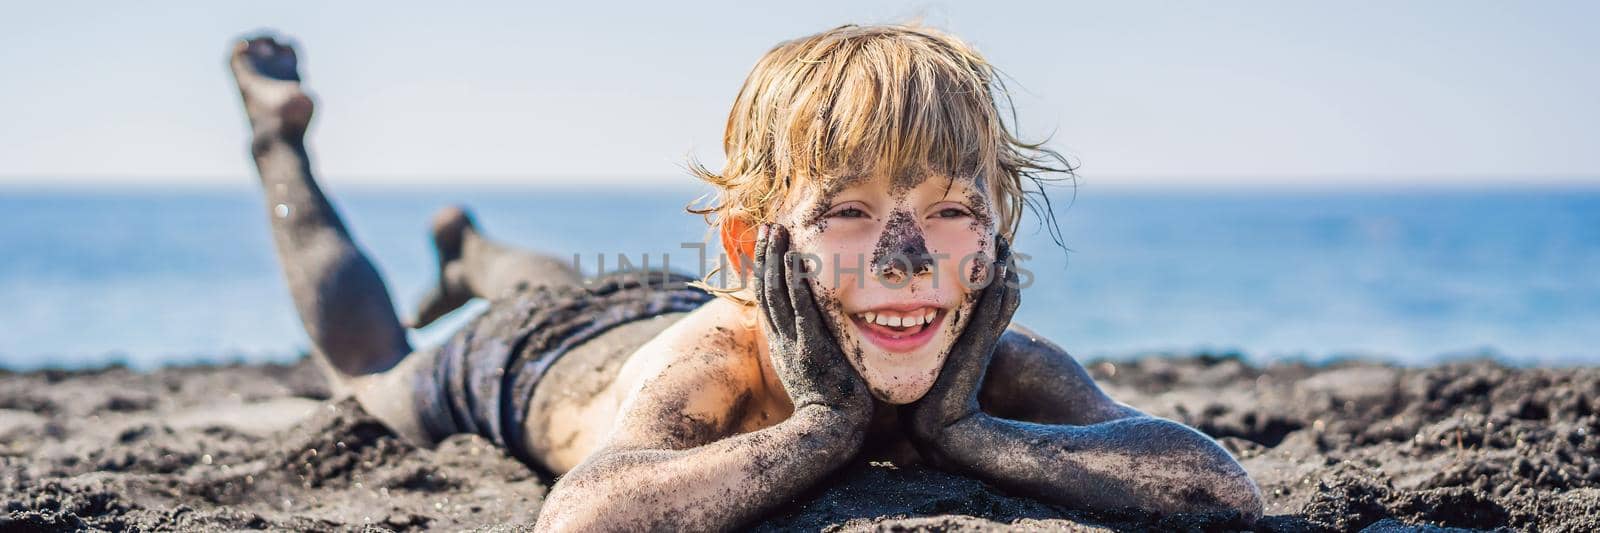 BANNER, LONG FORMAT Black Friday concept. Smiling boy with dirty Black face sitting and playing on black sand sea beach before swimming in ocean. Family active lifestyle, and water leisure on summer vacation with kids. Black Friday, sales of tours and airline tickets or goods by galitskaya